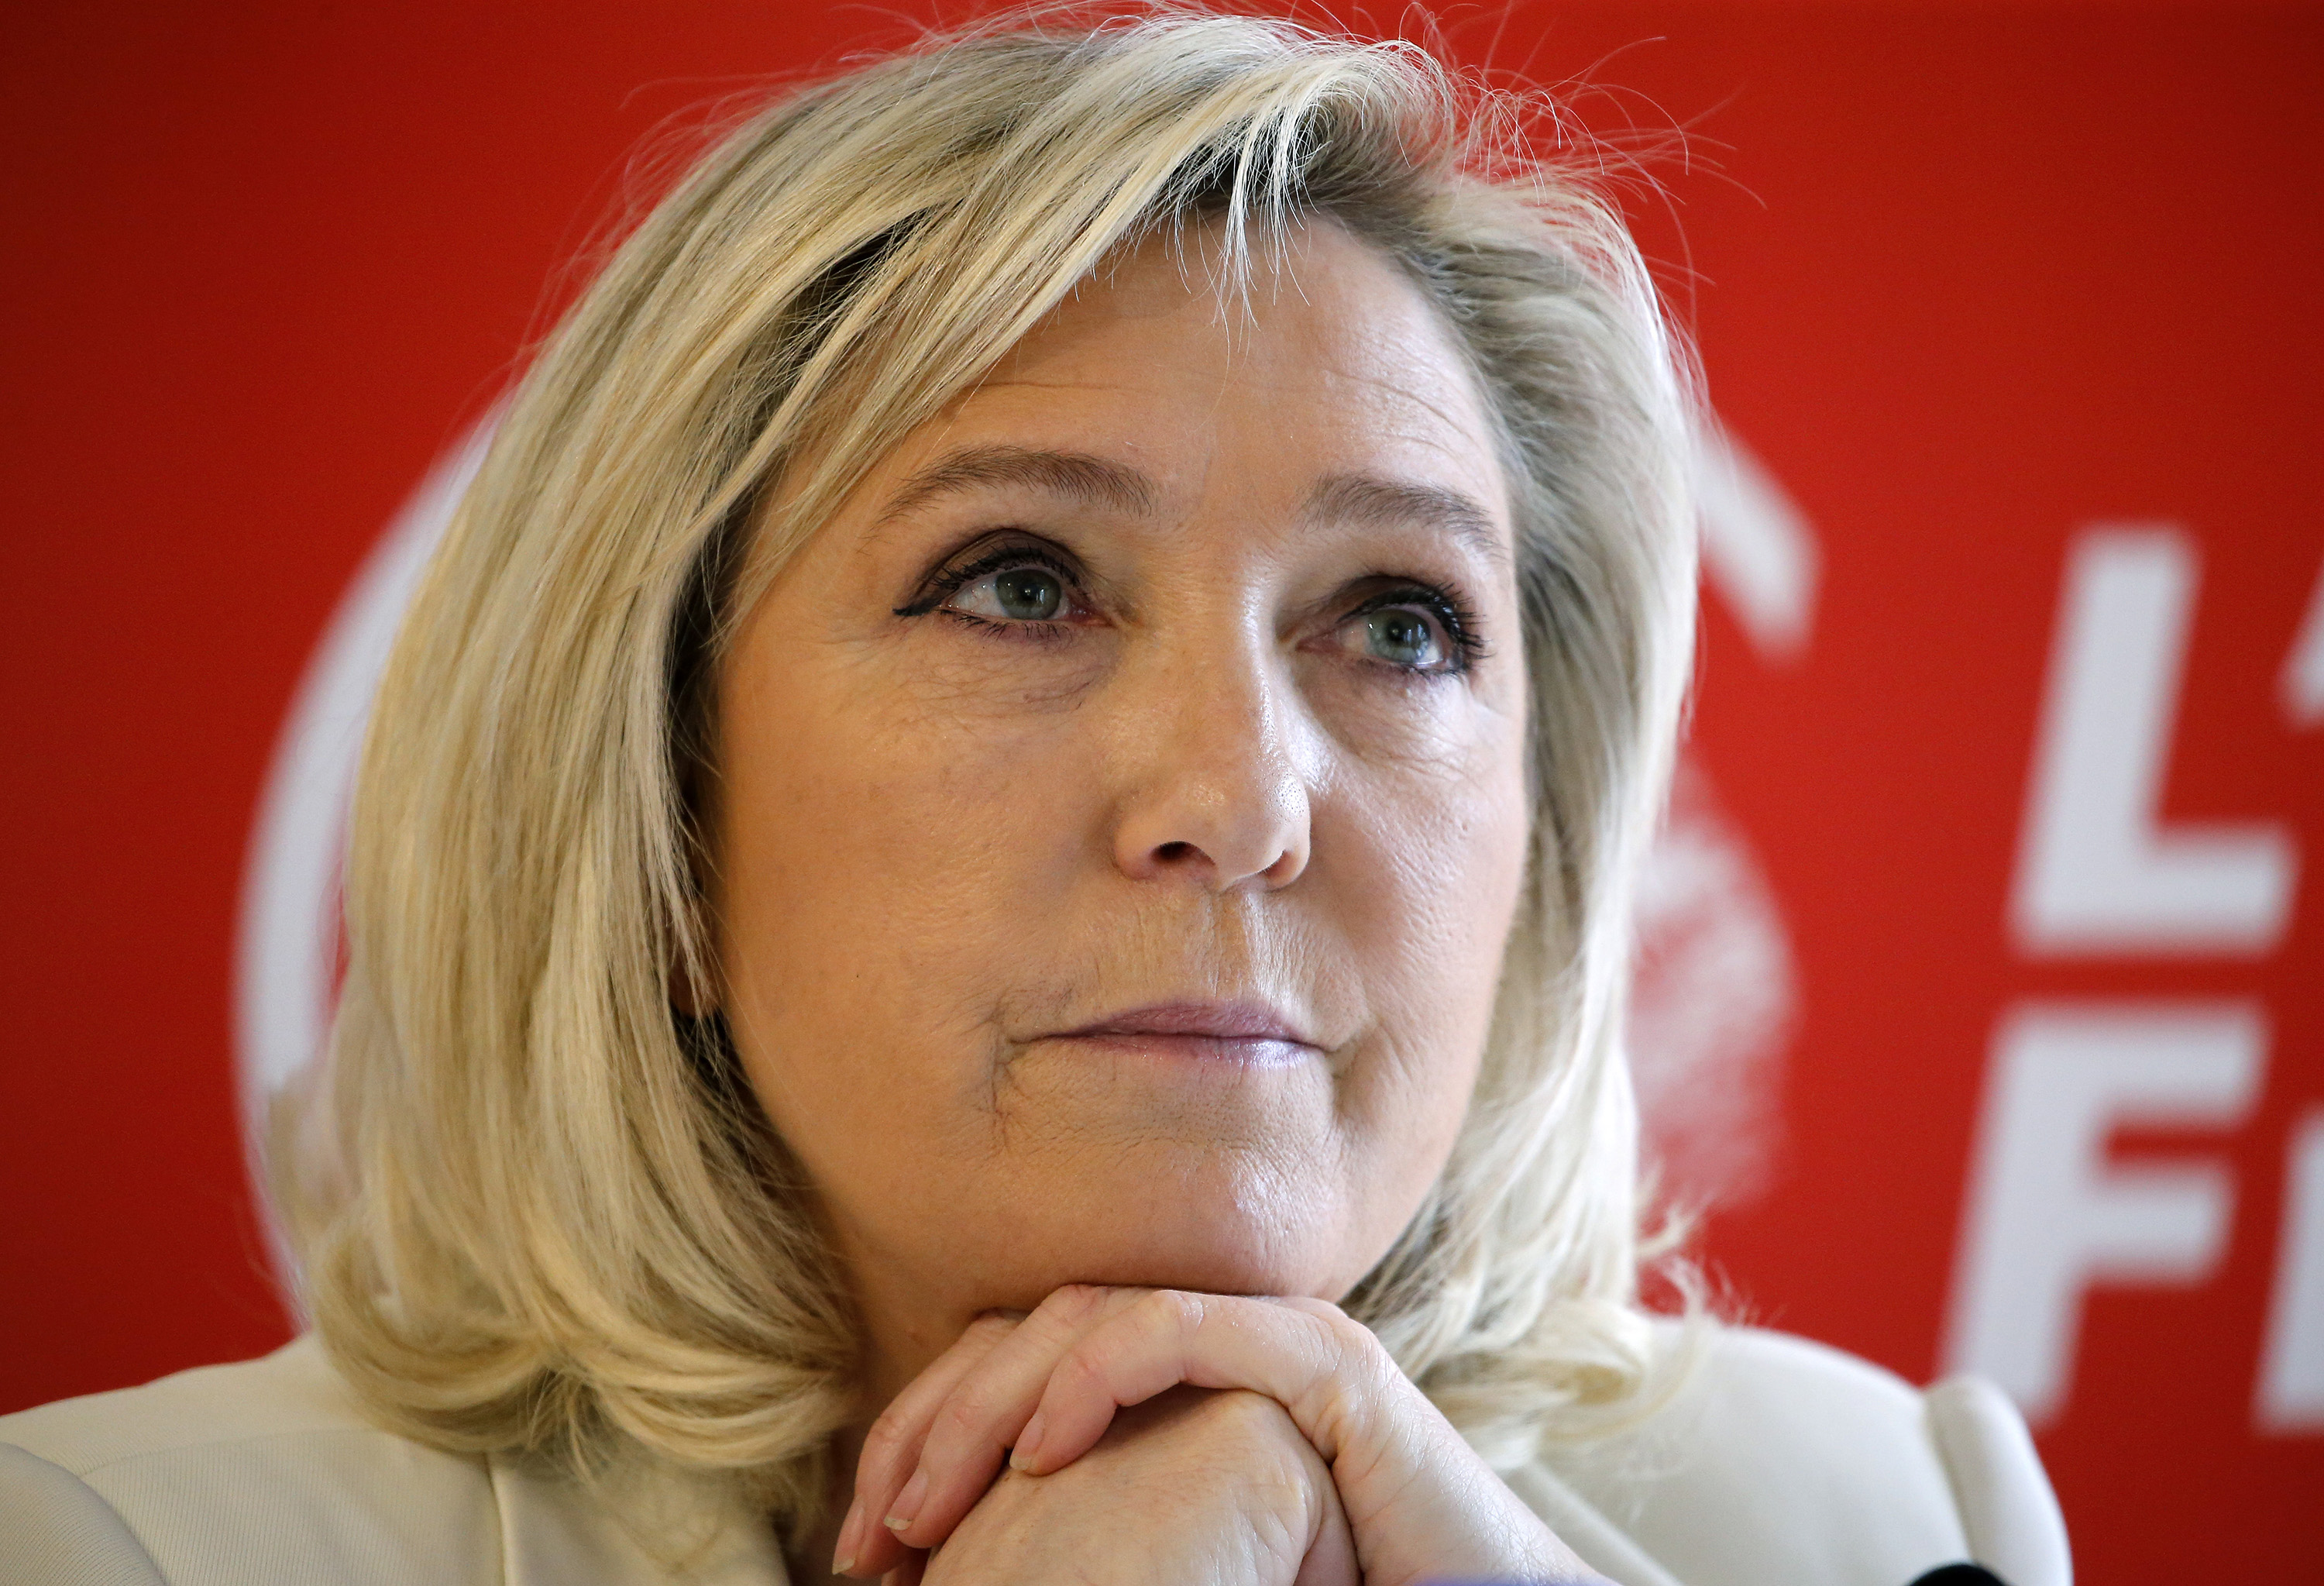 Nearly half of French people think far-right politician Le Pen has